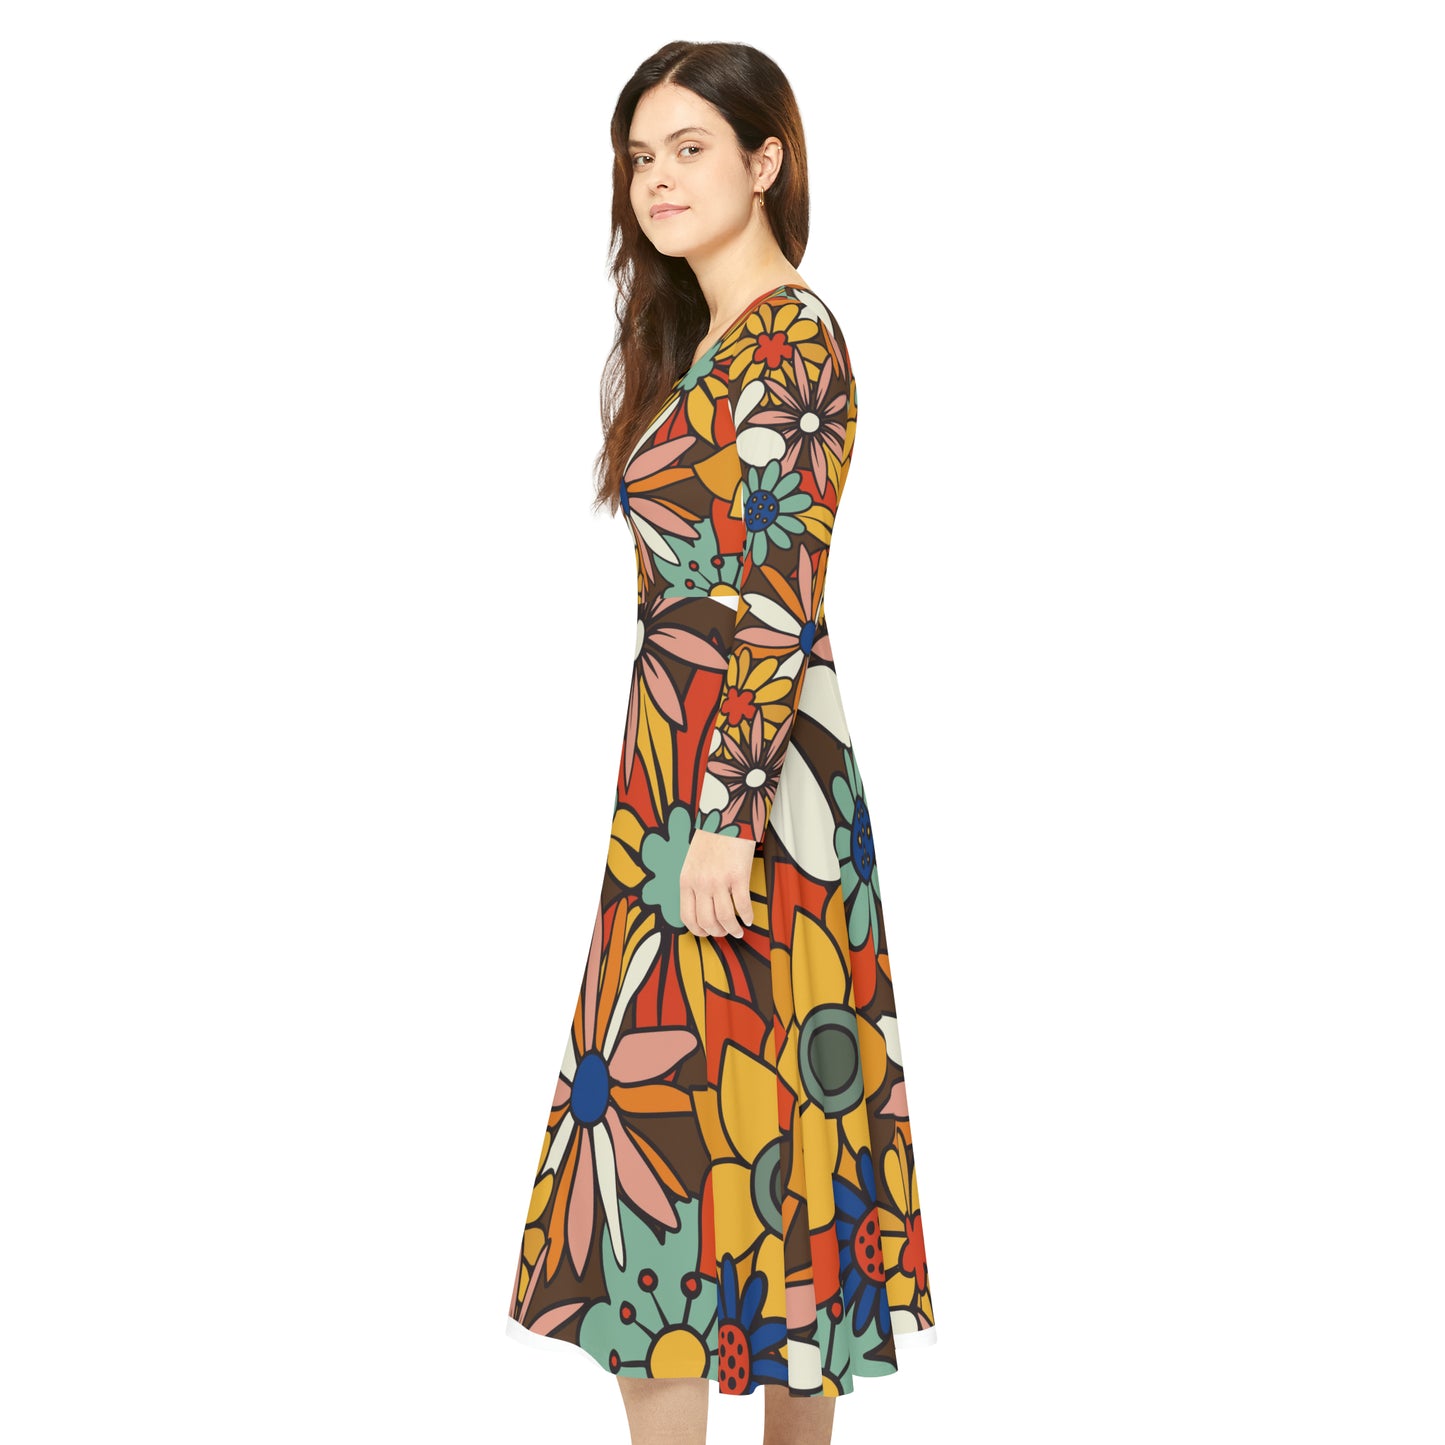 Flower Is My World- Long Sleeve Dress Collection